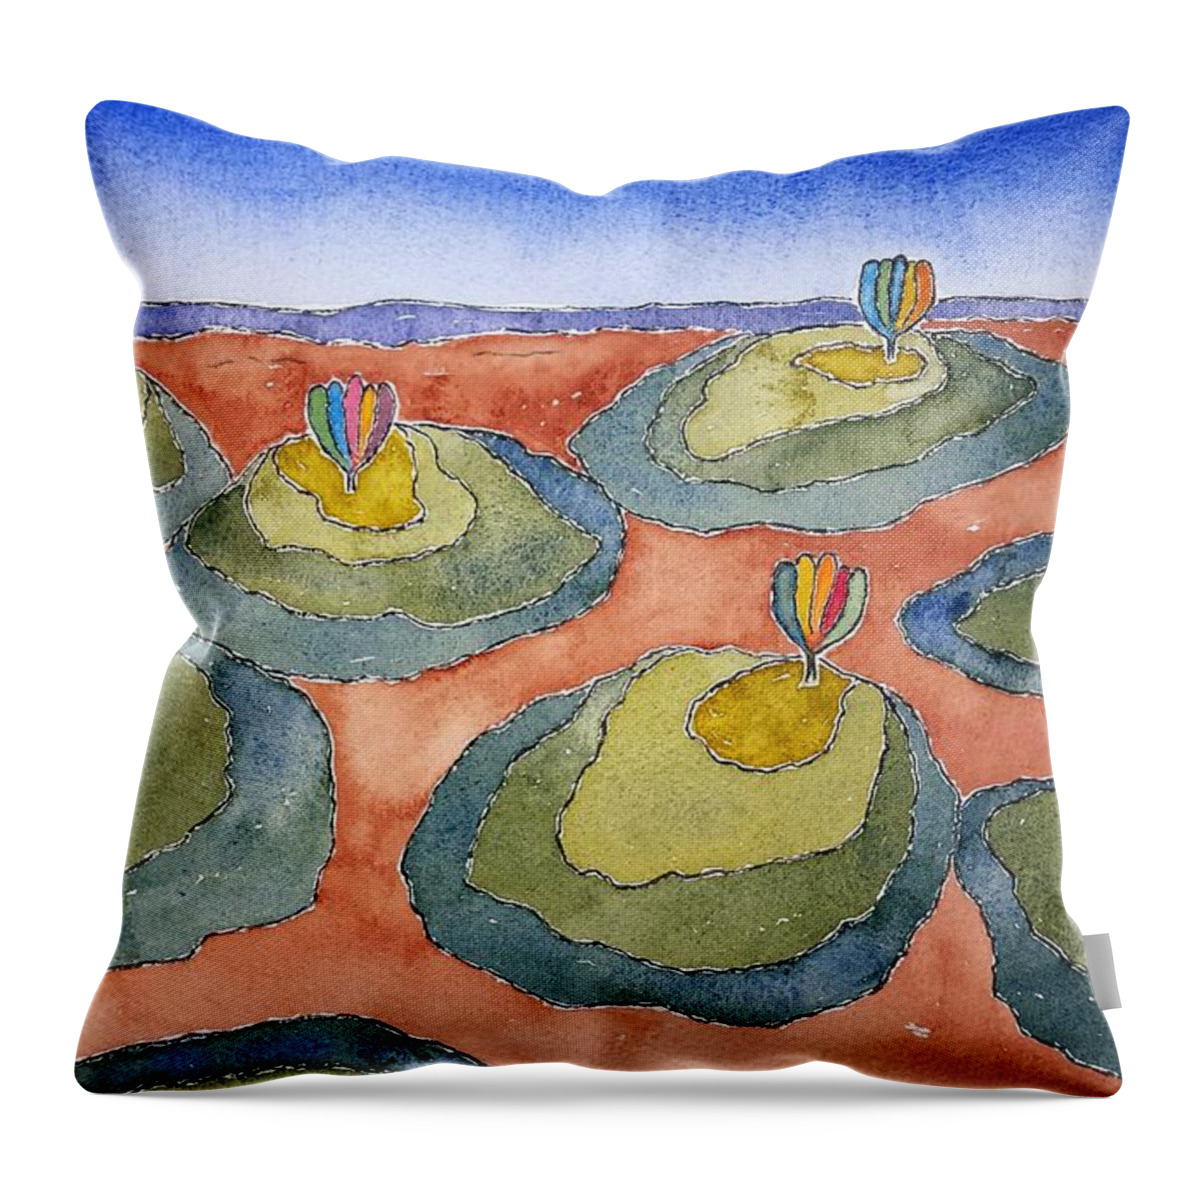 Watercolor Throw Pillow featuring the painting Seven Hill Lore by John Klobucher